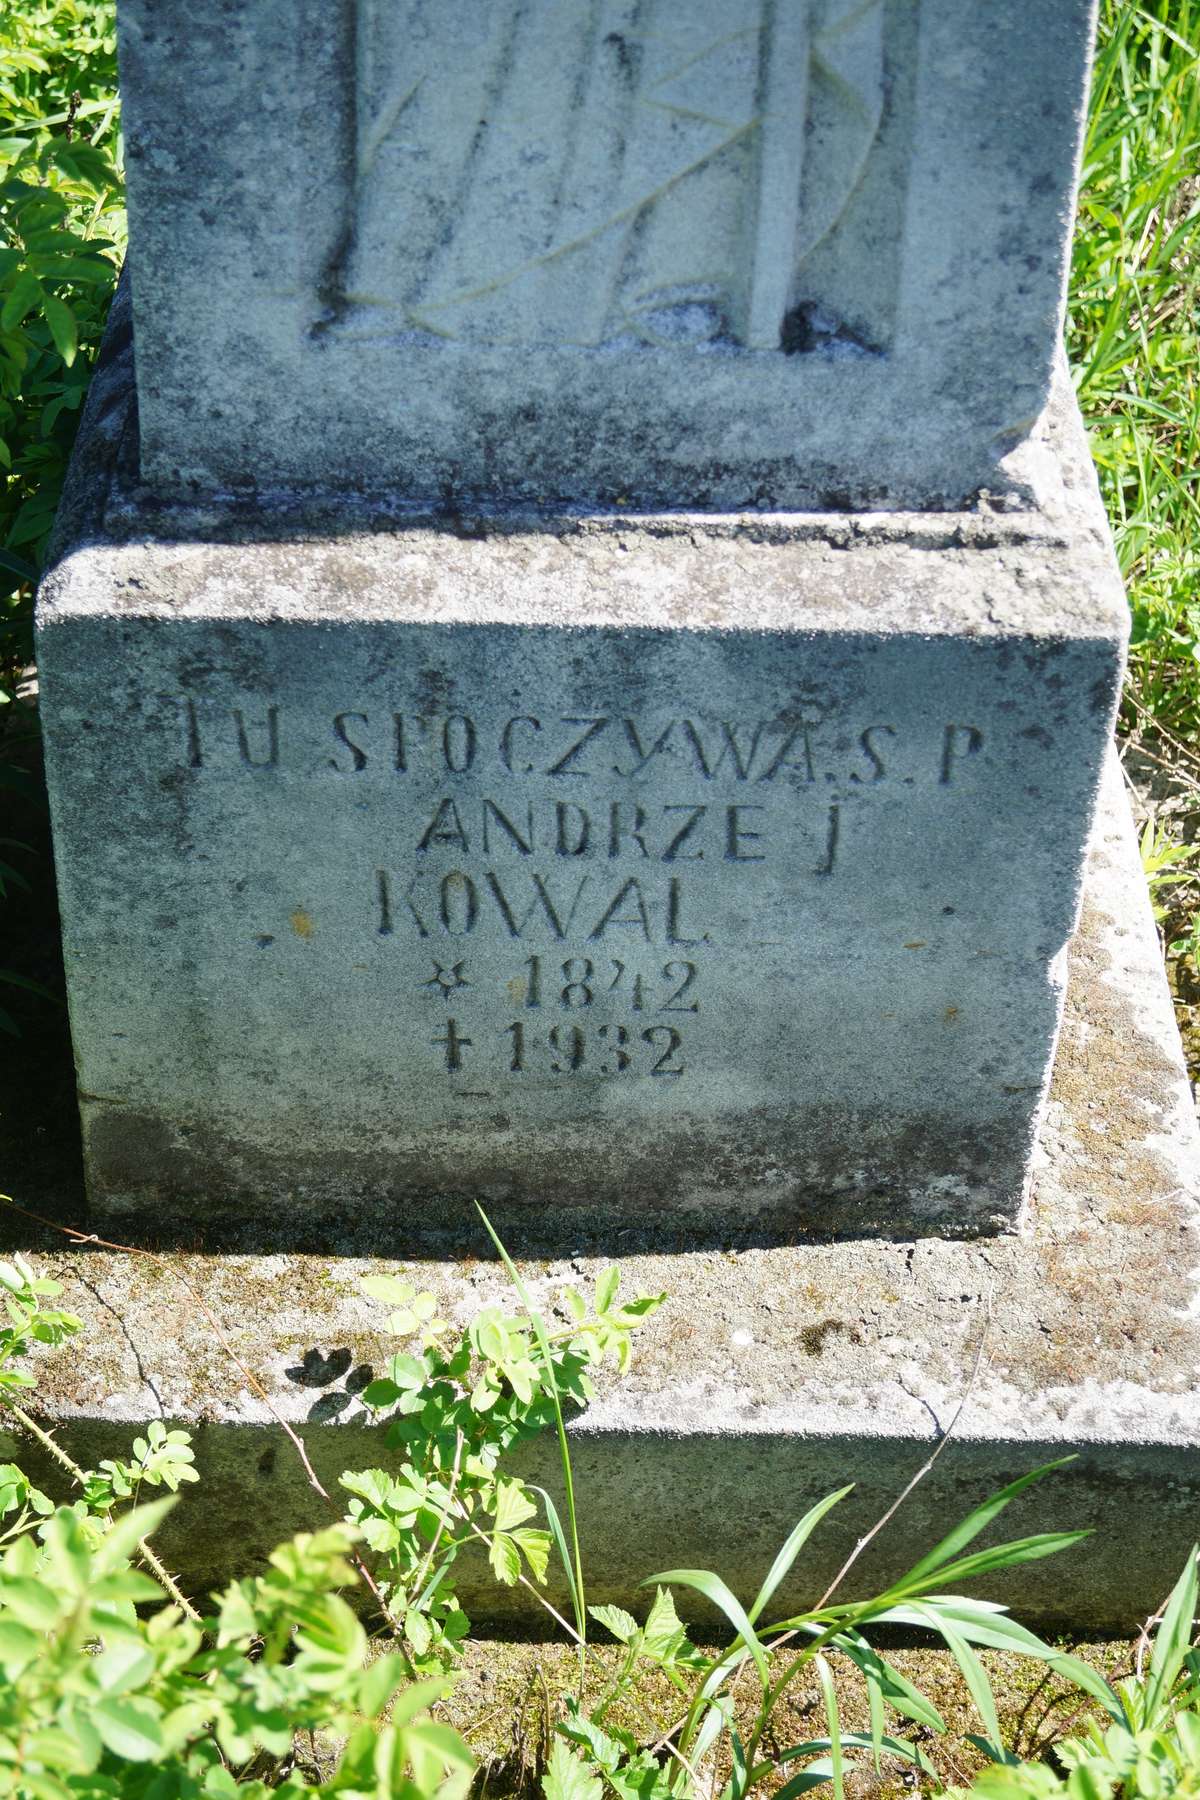 Tombstone of Andrzej Kowal, cemetery in Poczapińce